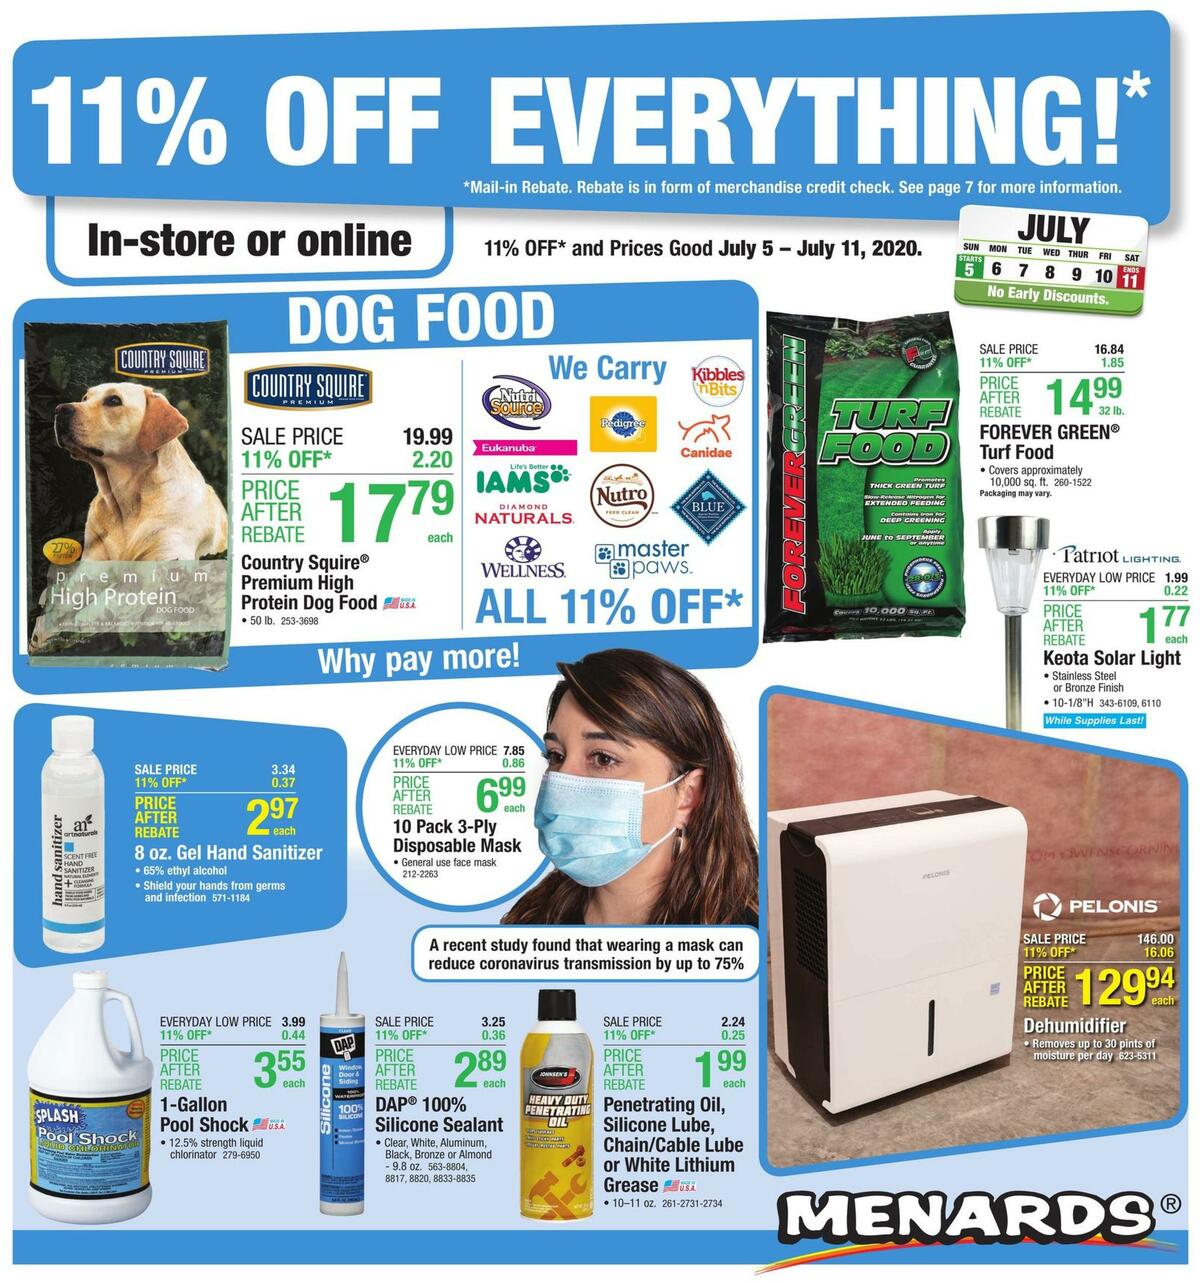 Menards Weekly Ads & Special Buys for July 5